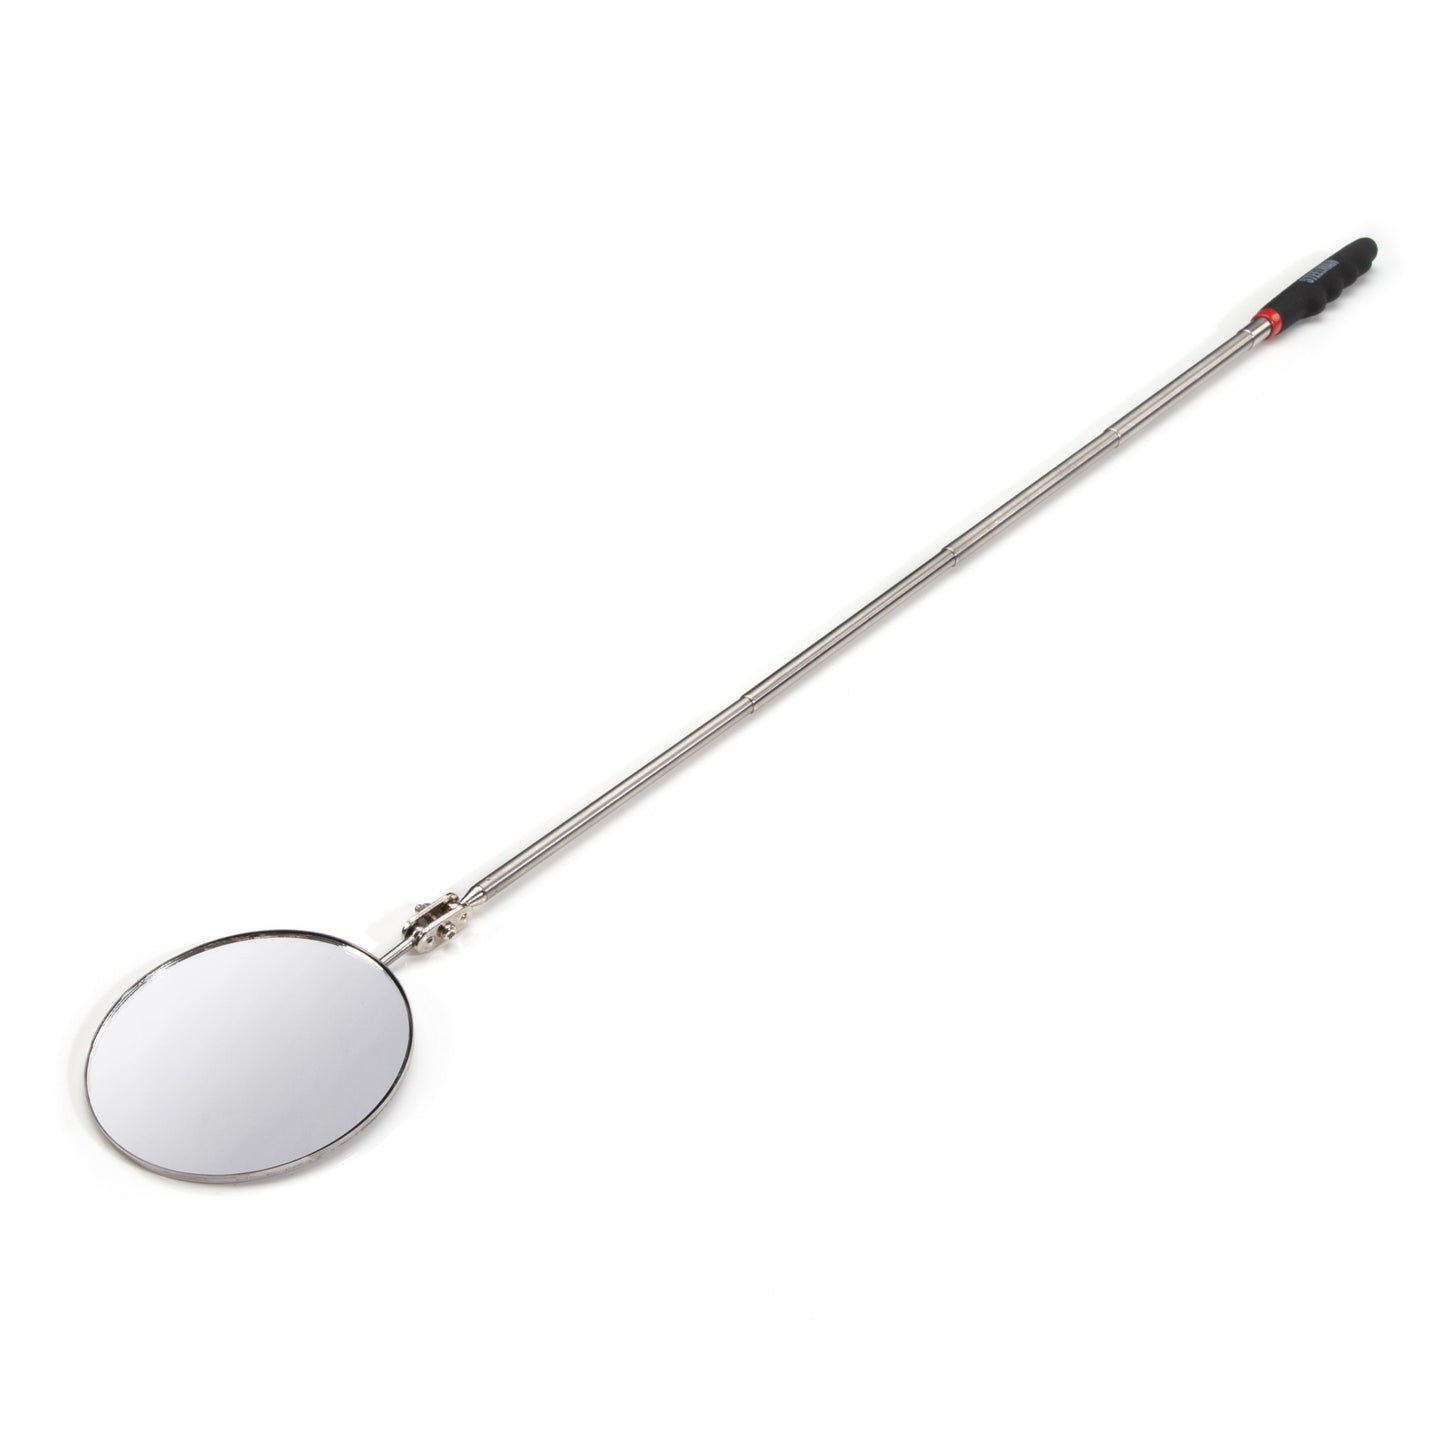 29-Inch Telescoping 3.25-Inch Round Inspection Mirror (2-Pack)